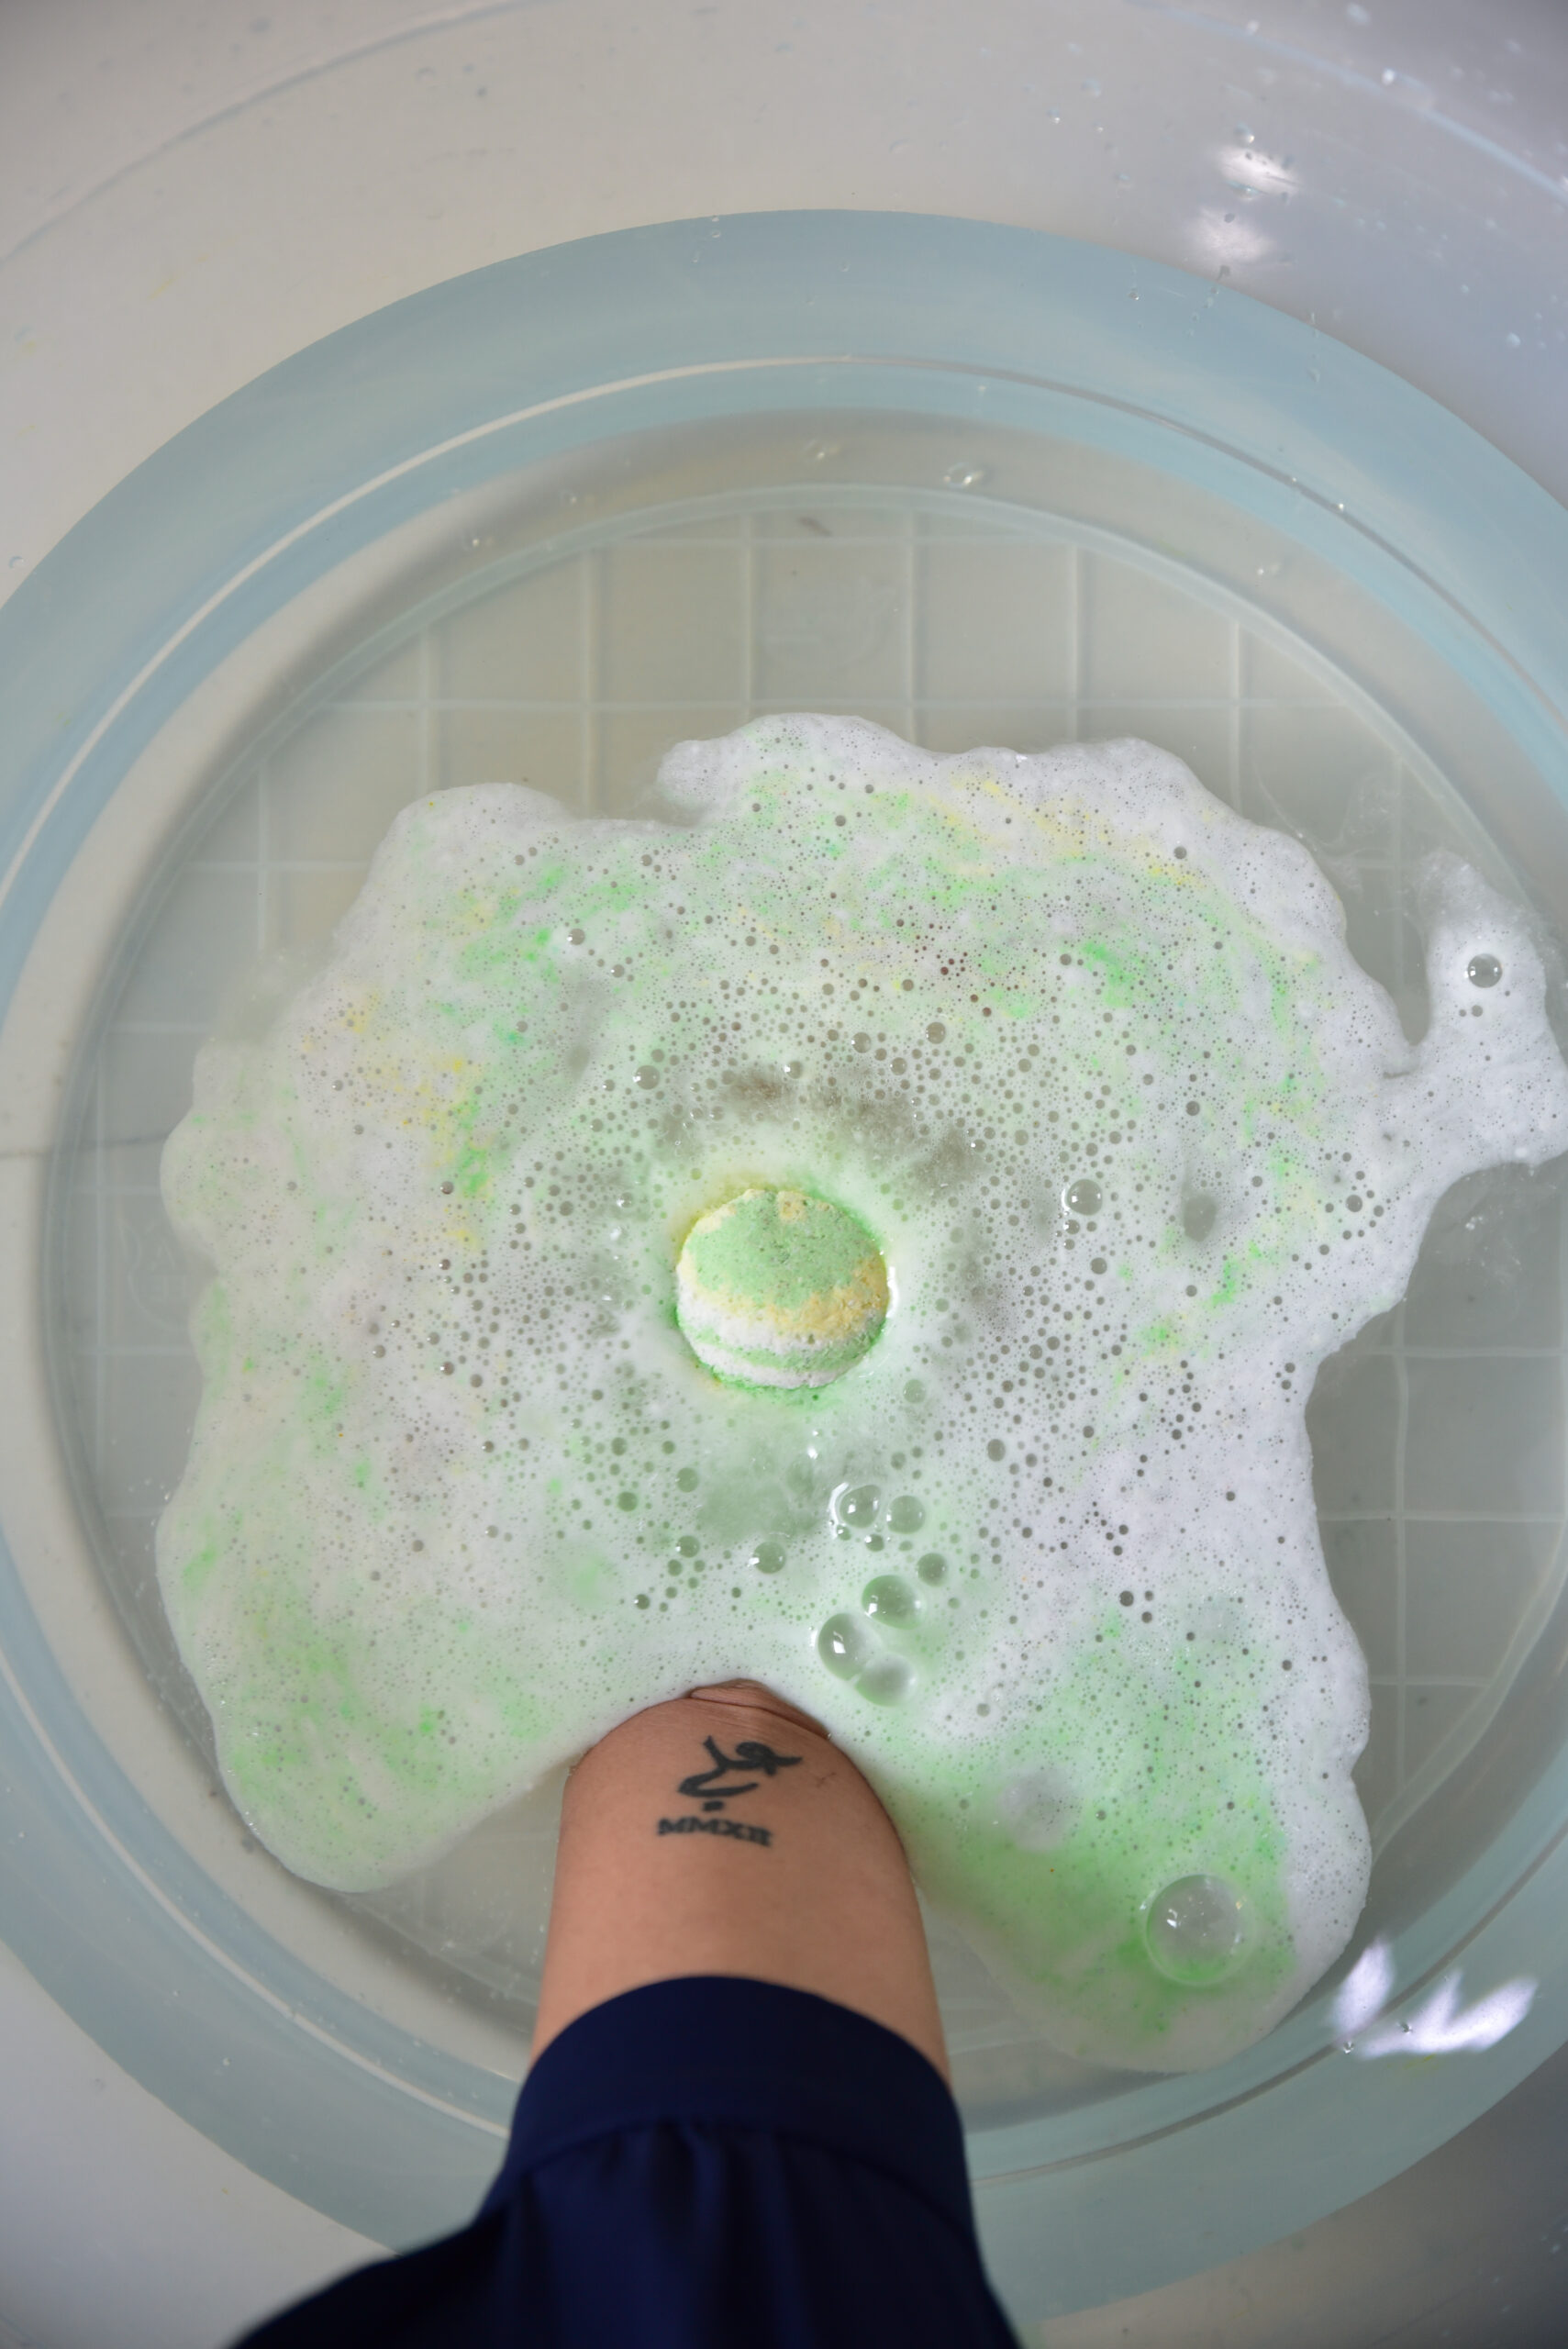 Elevating Your Manicure and Pedicure Experience with Bath Bombs